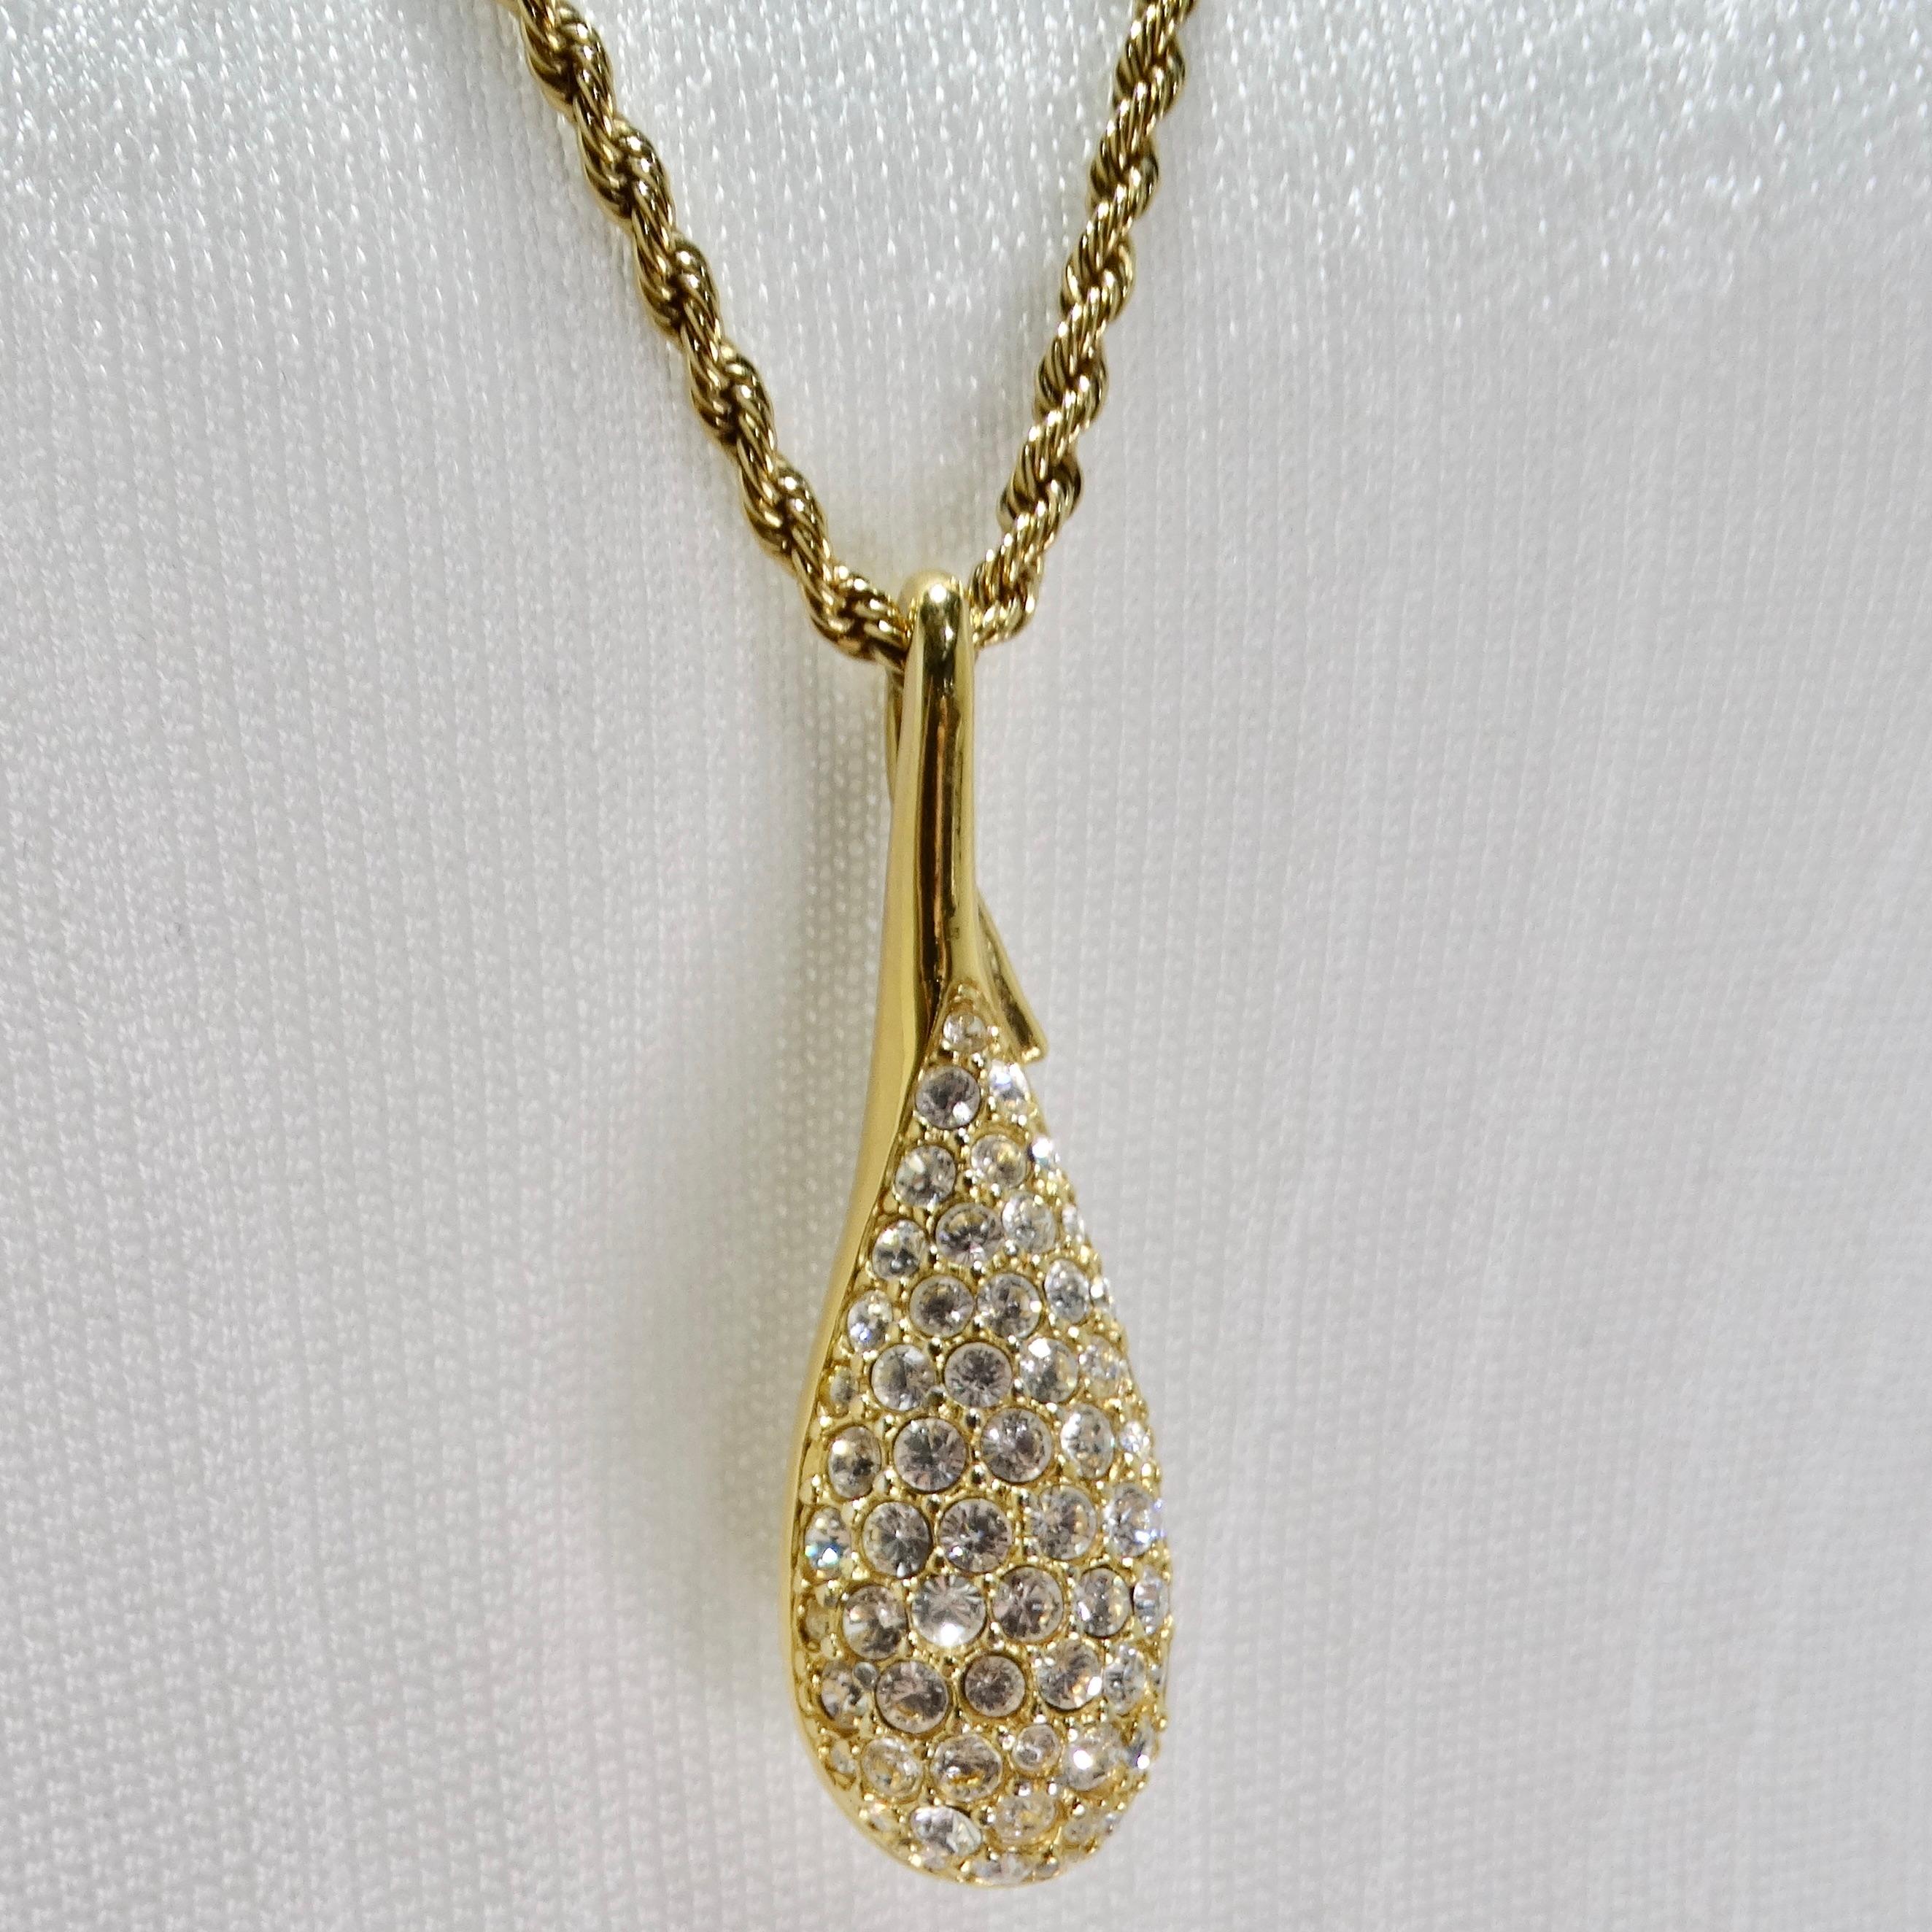 The Swarovski Vintage 18K Gold Plated Crystal Pendant Necklace is a glamorous piece from the 1980s that combines elegance with the brilliance of Swarovski rhinestones. This chain necklace features a large teardrop-shaped pendant adorned with